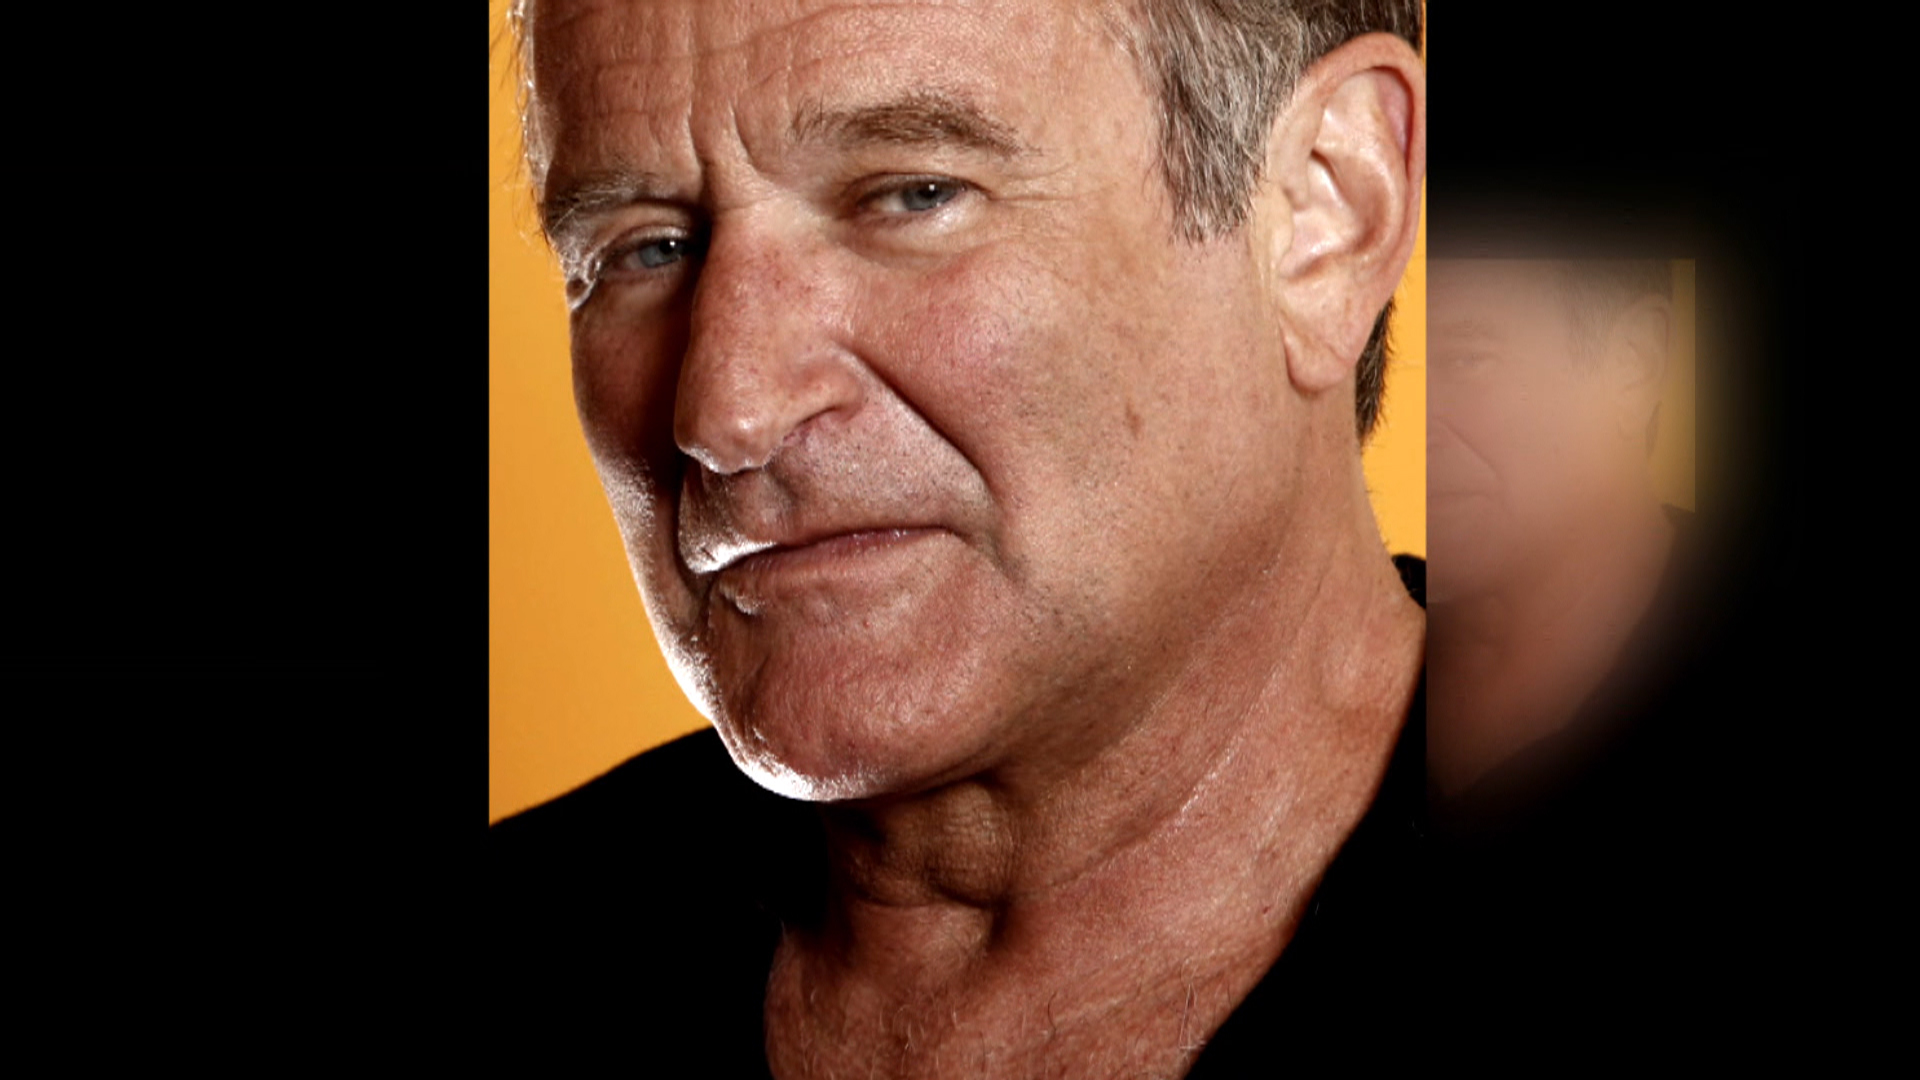 No Alcohol Or Drugs Involved In Death Of Robin Williams